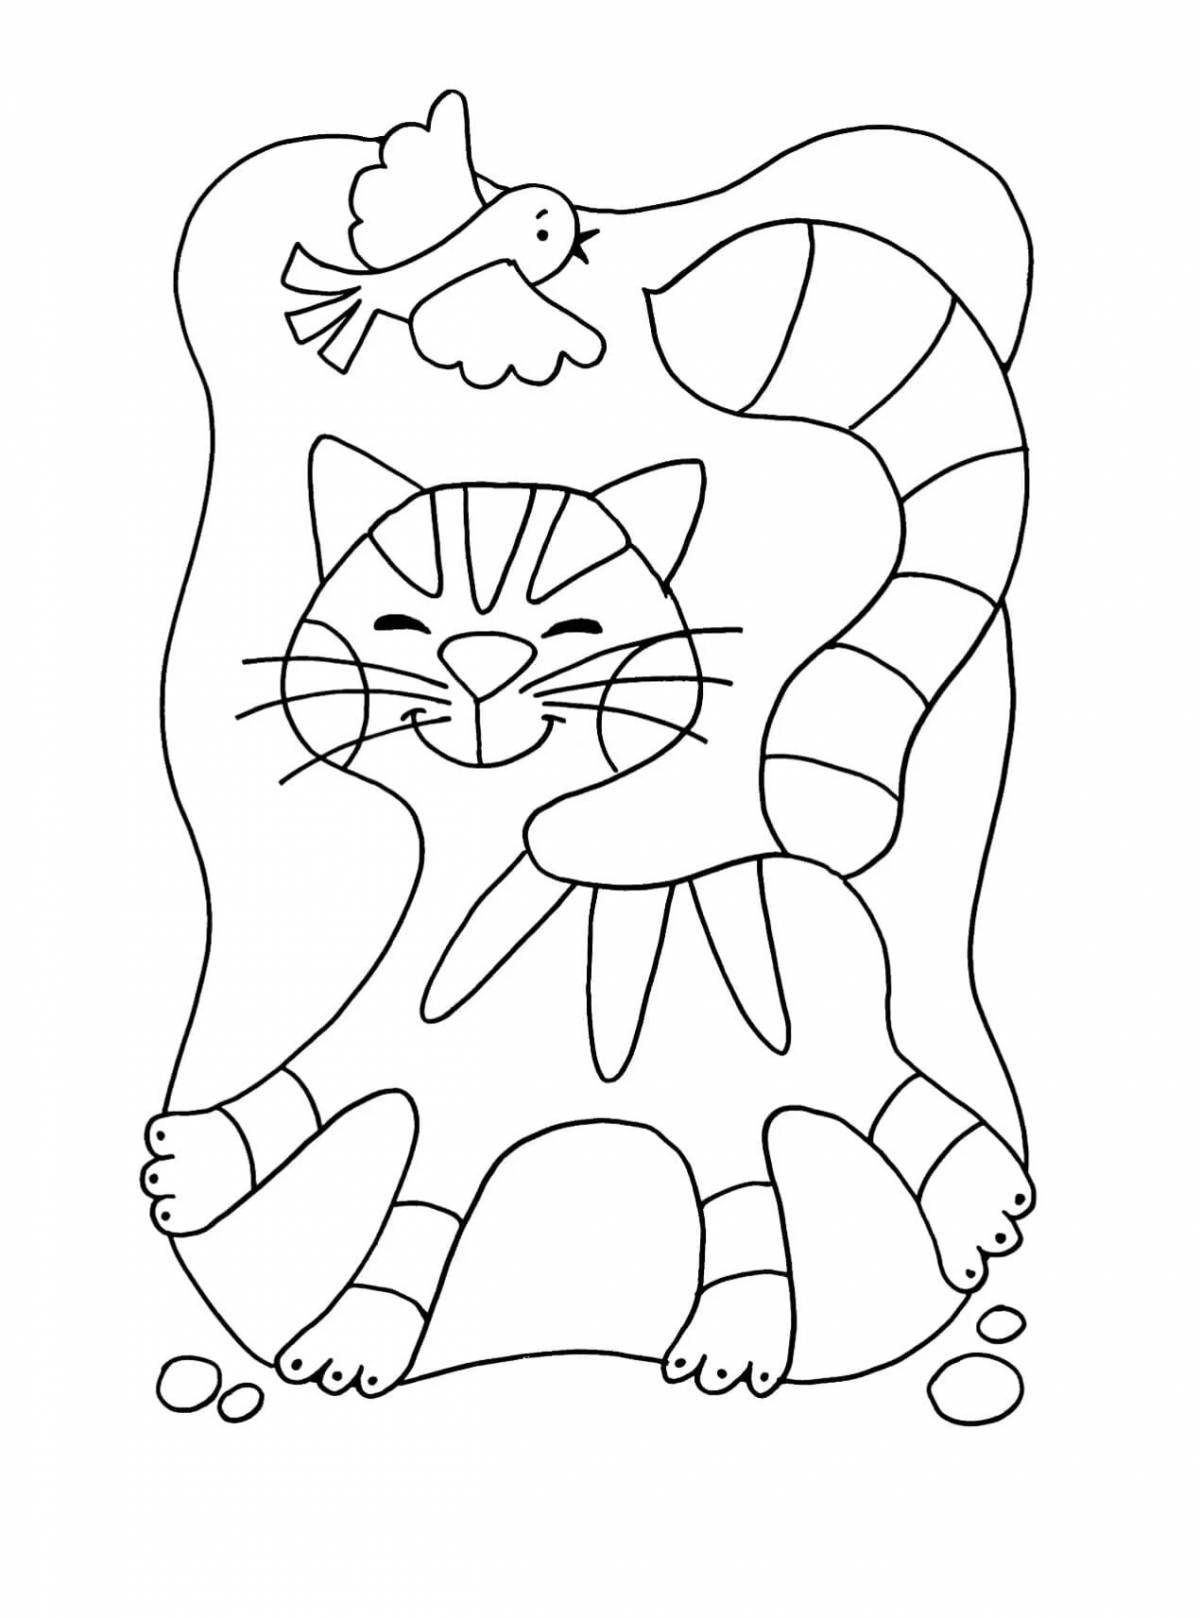 Cute stained glass coloring pages for kids